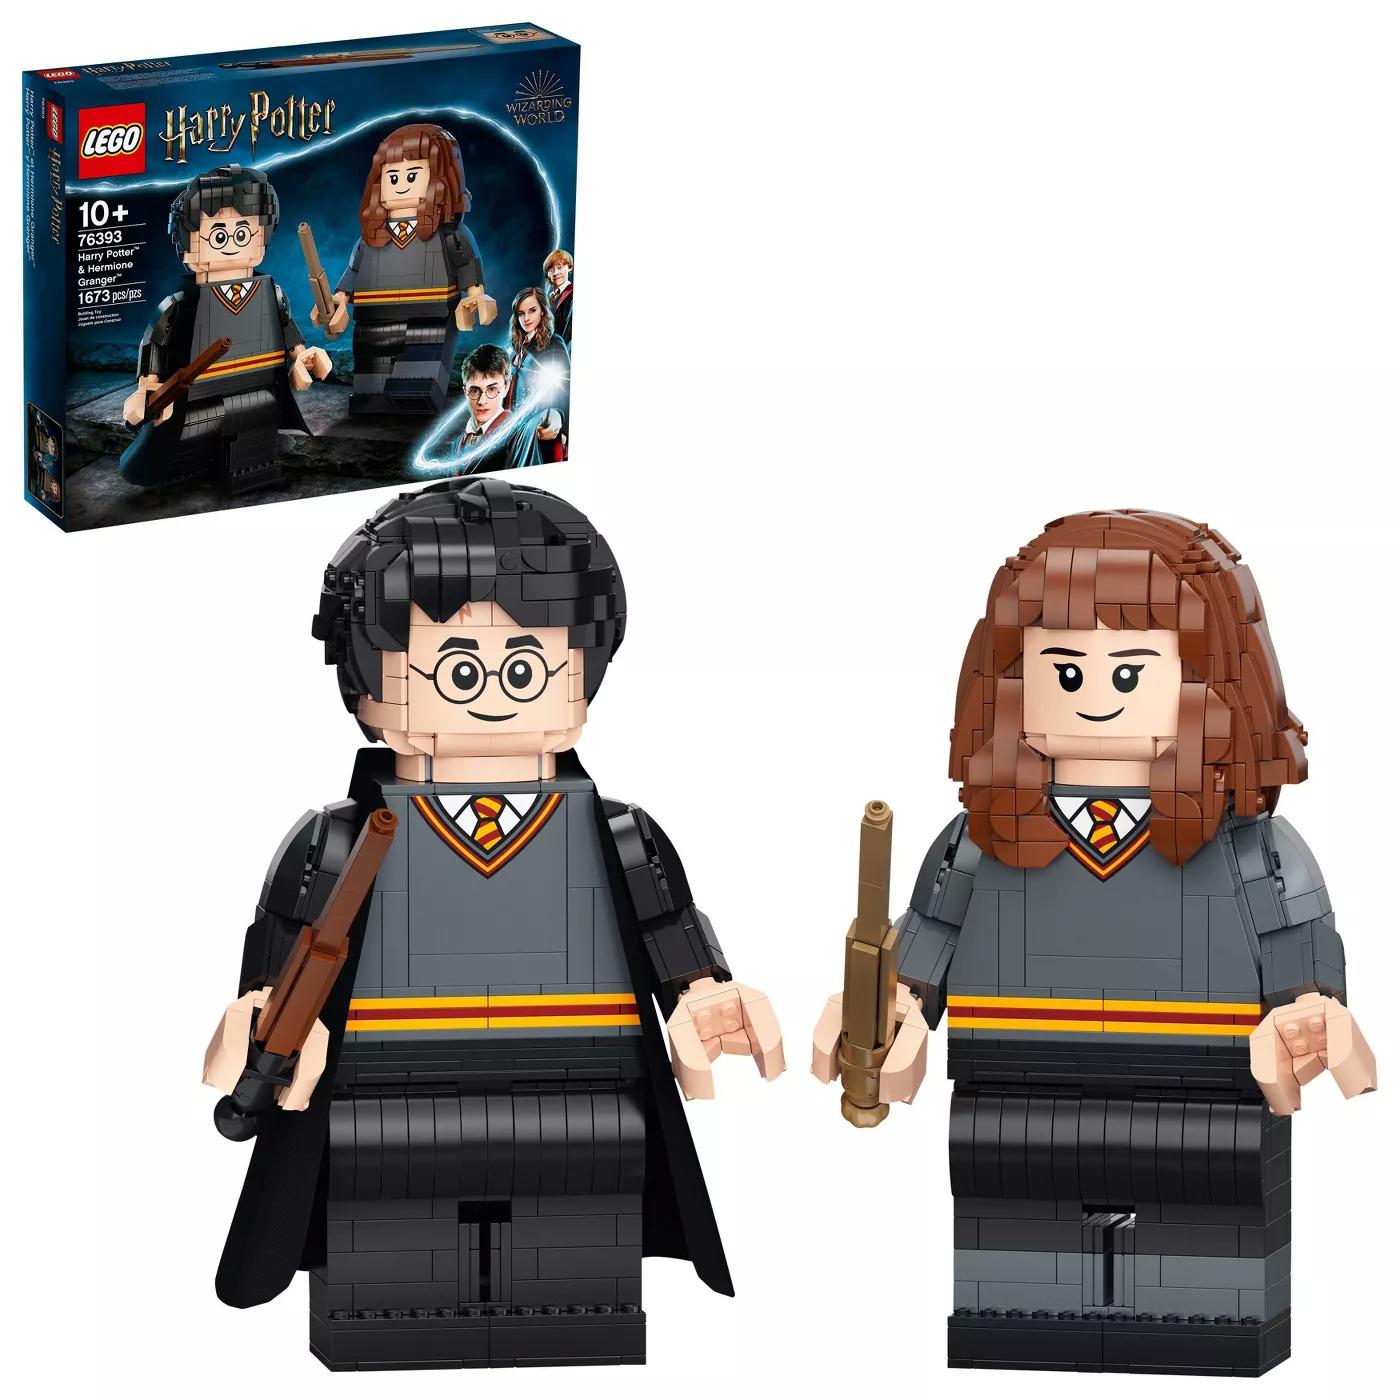 1673-Piece LEGO Harry Potter and Hermione Granger Building Kit for $59.99 Shipped